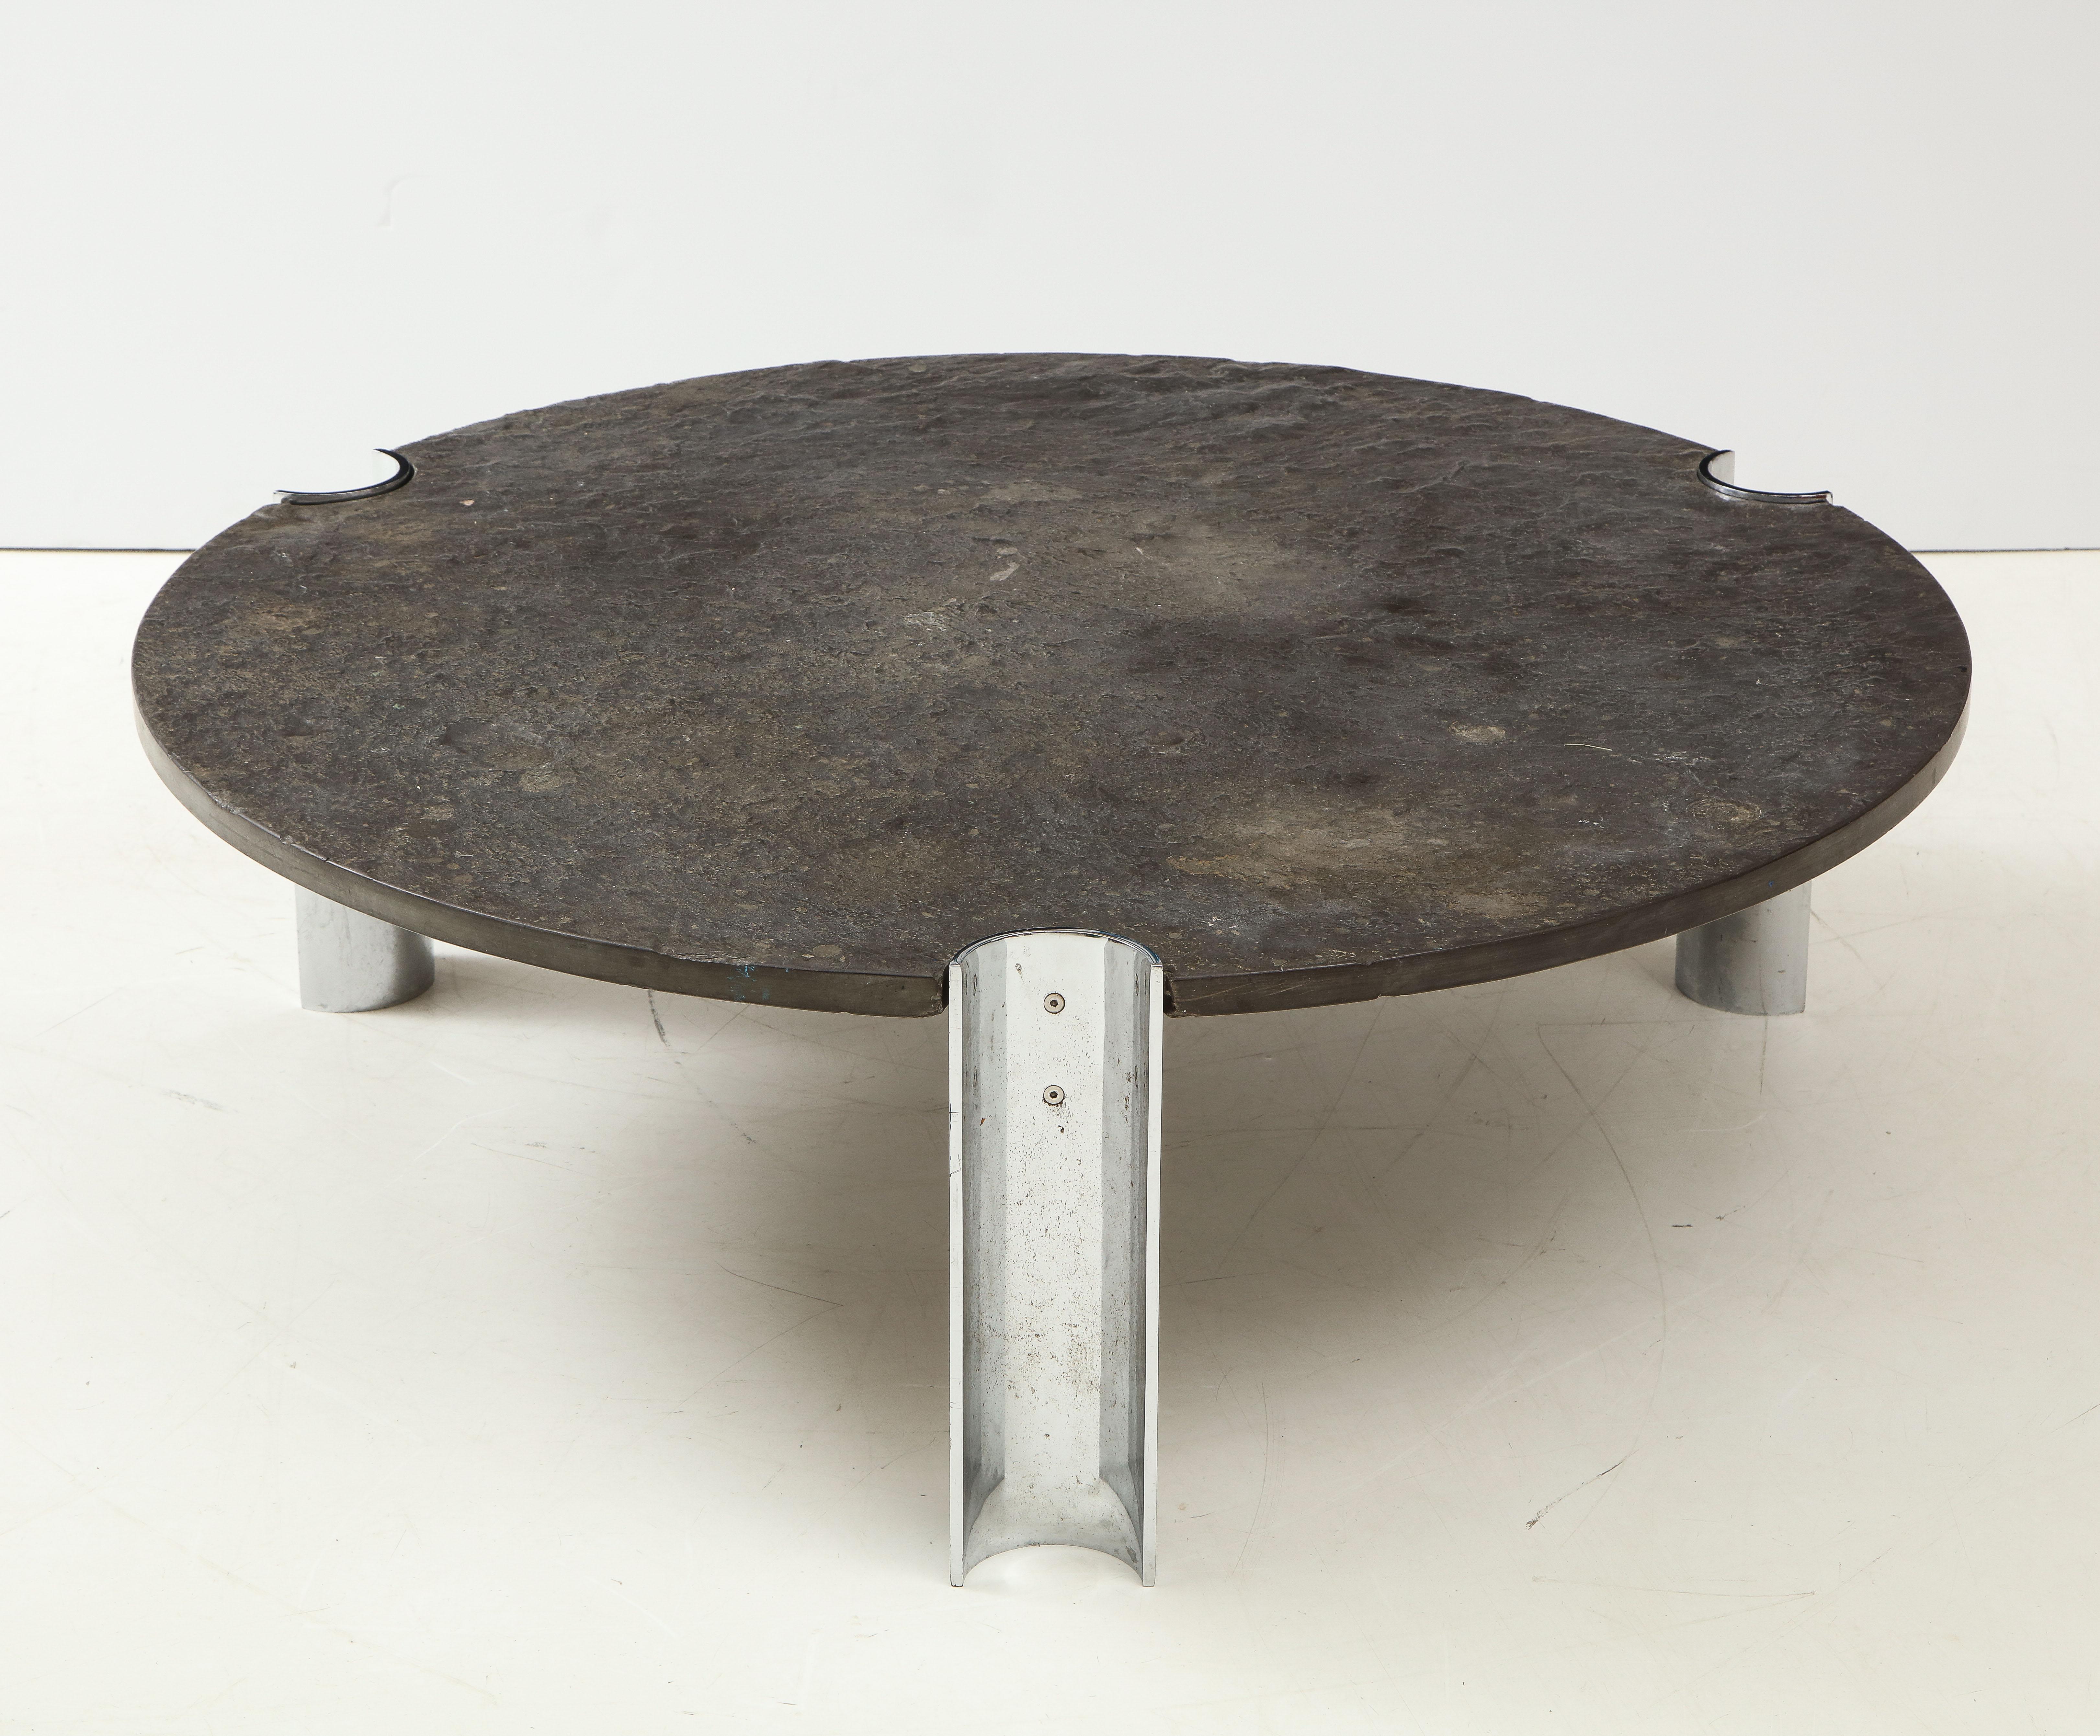 Mid-Century Limestone and Chrome Coffee Table with Fossils, Brazil, c. 1970s. 

This rare and attractive table consists of sleek, industrial chrome legs paired with a round, textured Brazilian limestone top that contains pre-historic fossils in its